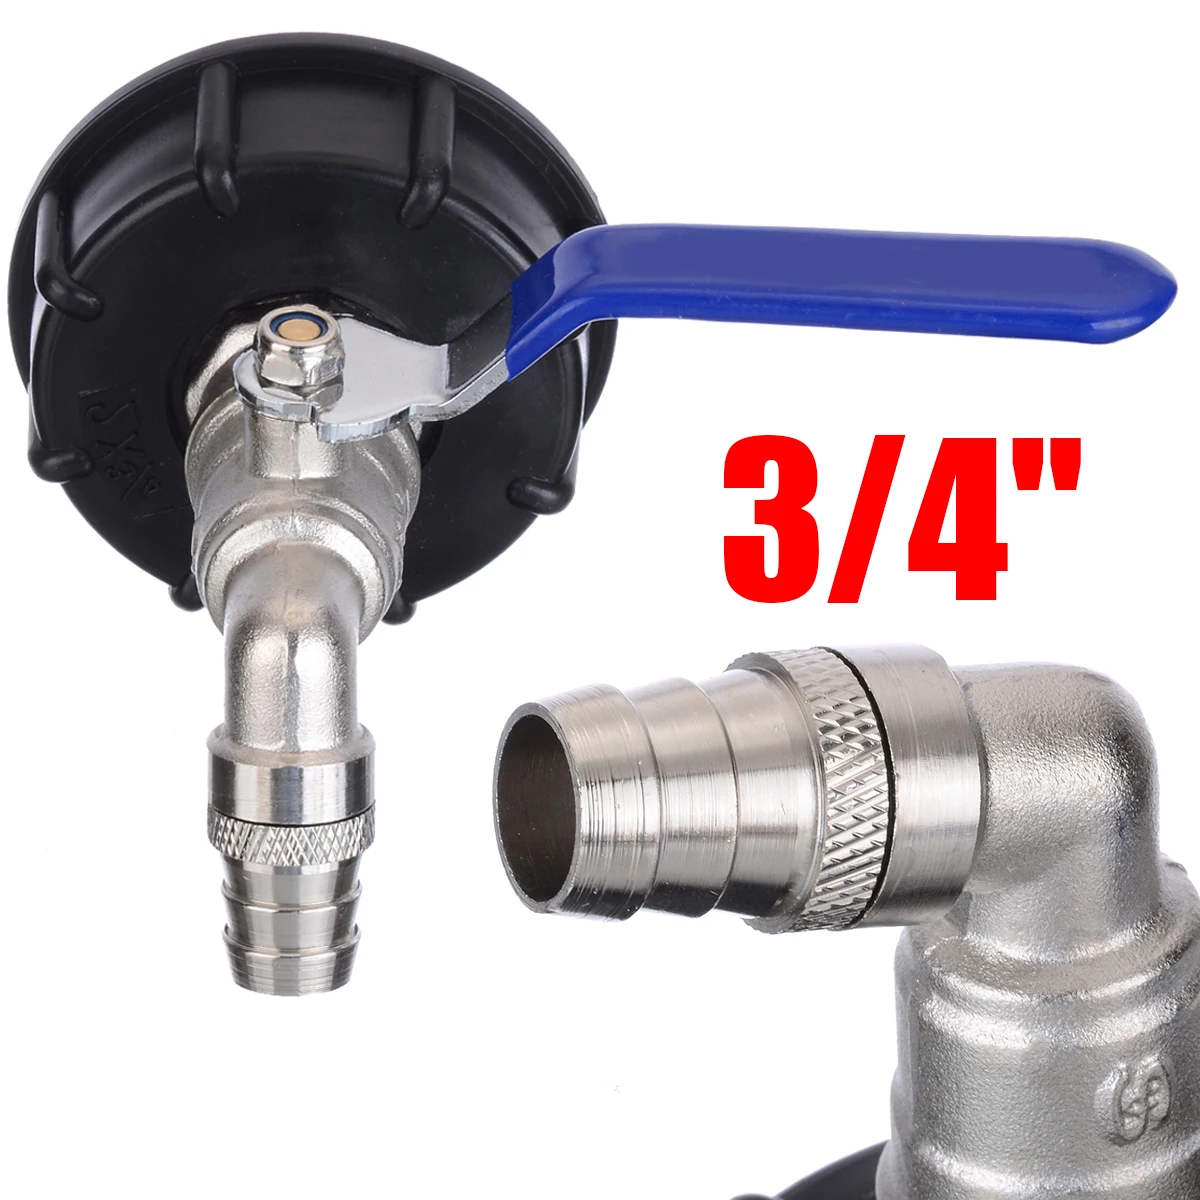 3/4" IBC Outlet Tap Adapter 1000L Tank Rainwater Container Fitting Connector TP 